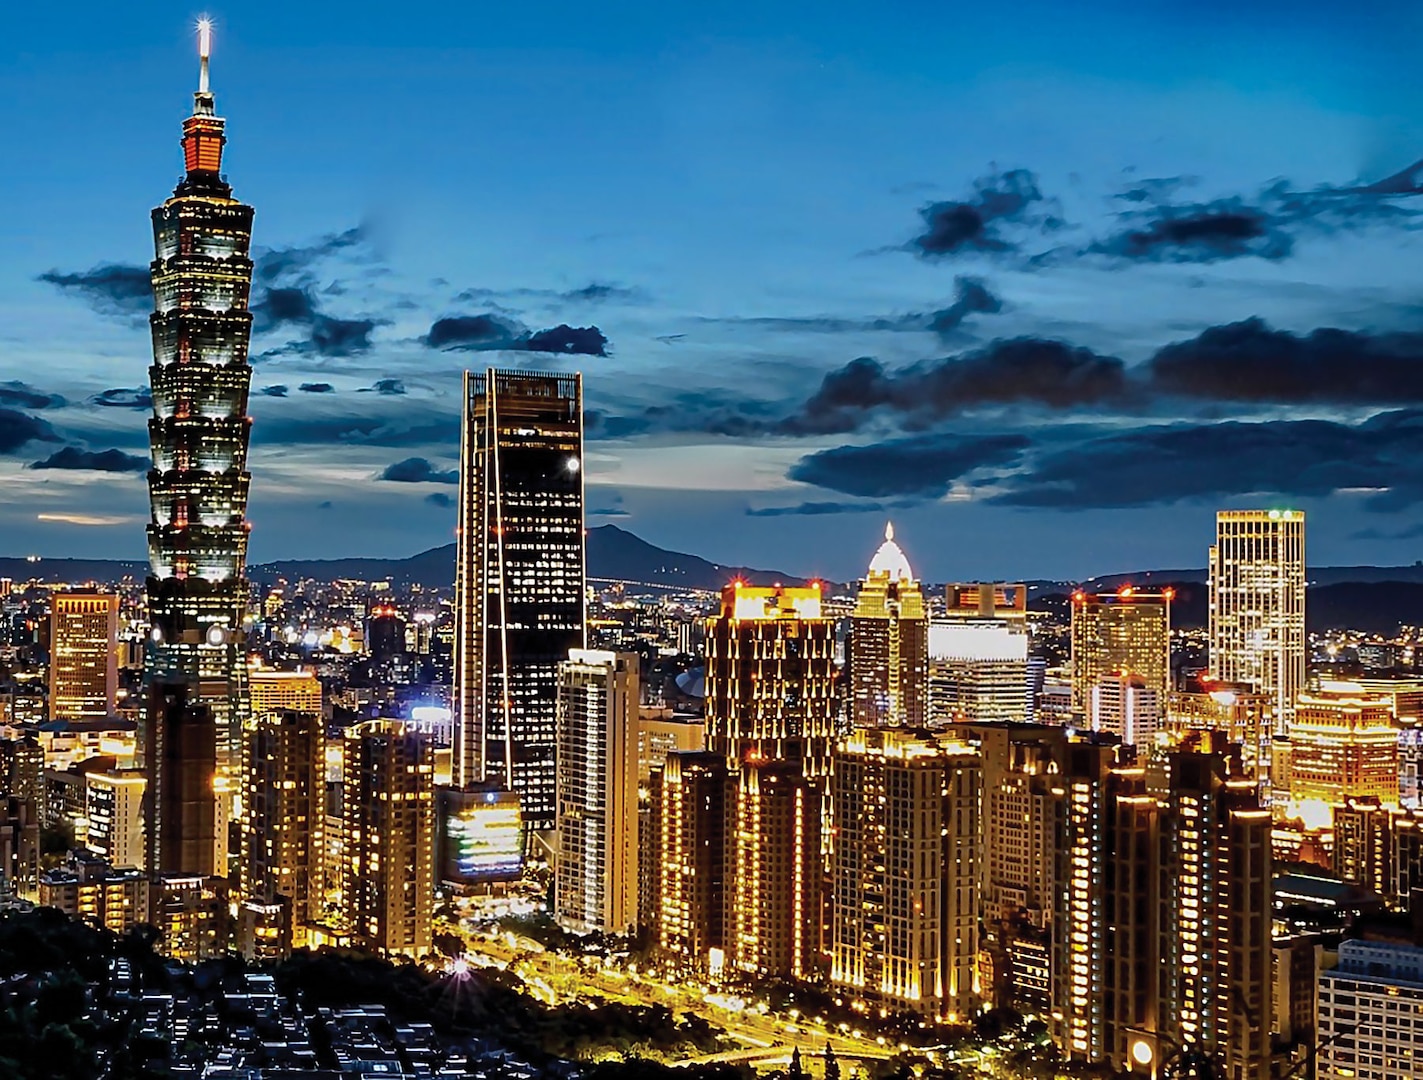 Taipei skyline view in 2020. The global pandemic is likely to harden Beijing’s positions on matters of party legitimacy and national sovereignty, such as over Taiwan. (Credit: 毛貓大少爺 from Taipei, Taiwan)